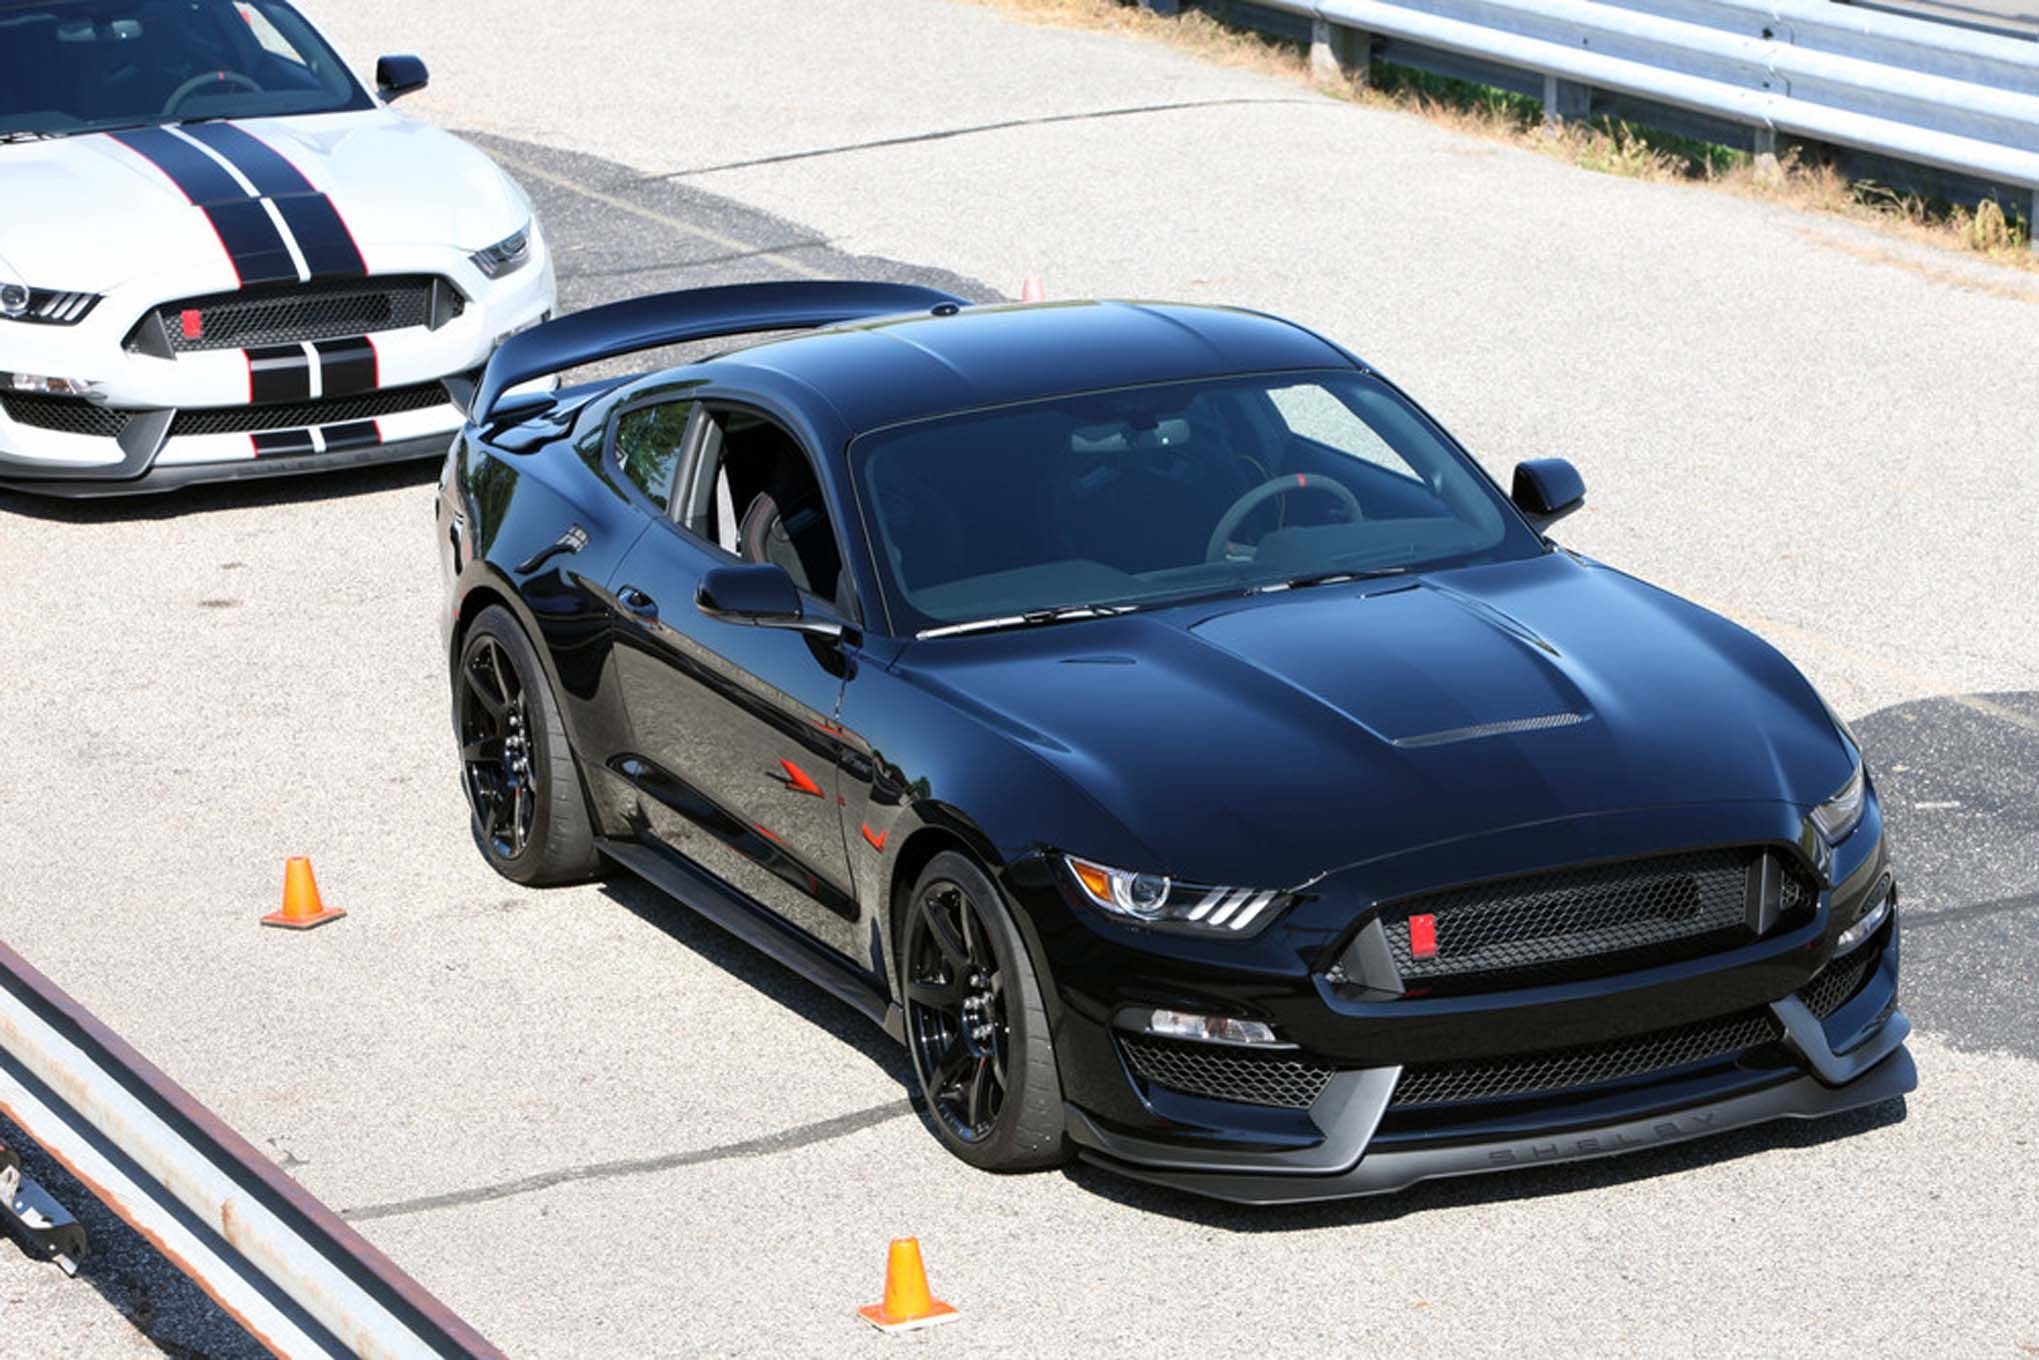 2014, Ford, Mustang, Shelby, Gt350r, Muscle, Supercar, Usa,  04 Wallpaper